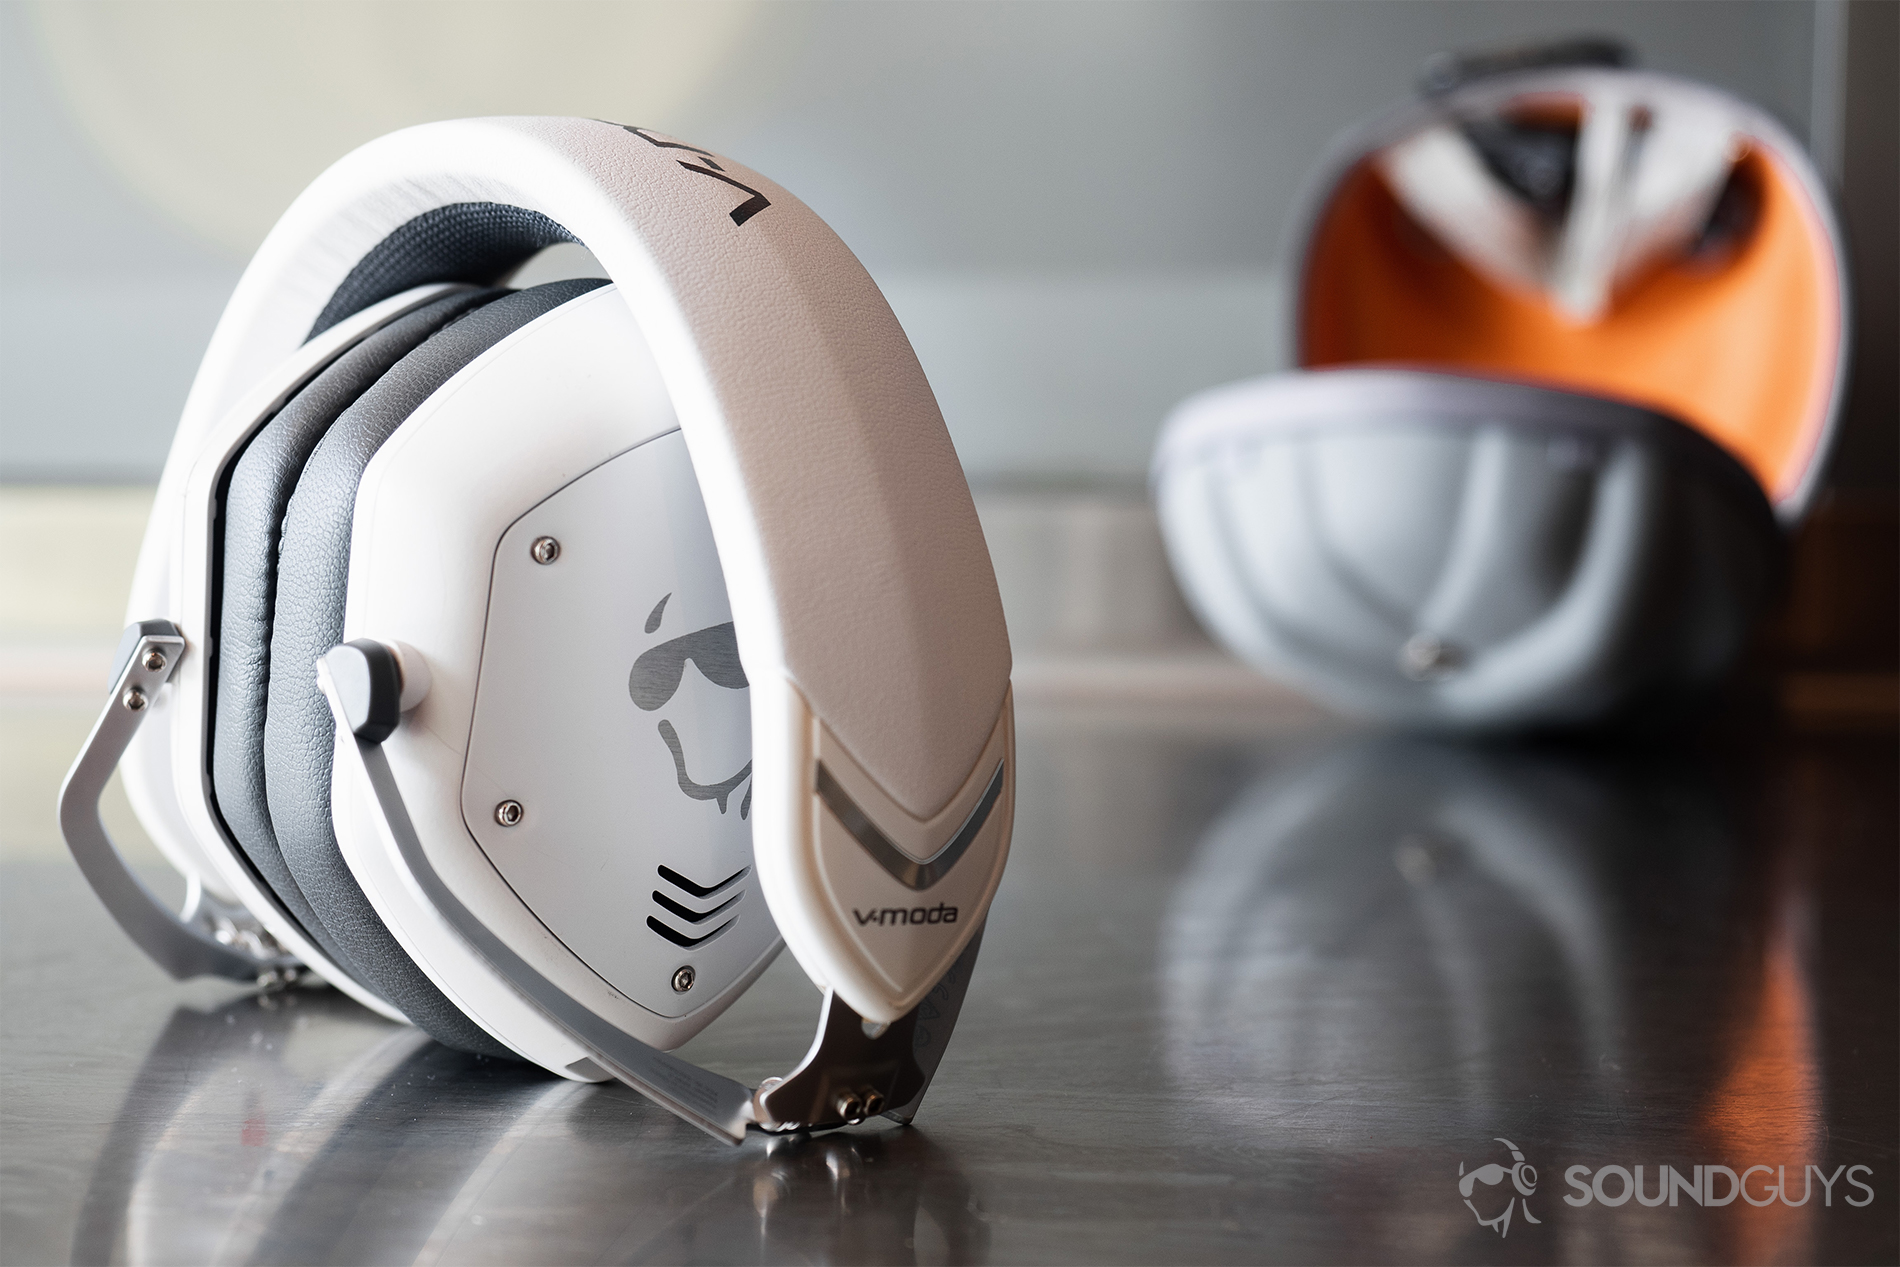 Best Bluetooth headphones: V-Moda Crossfade 2 Wireless Codex with SoundGuys logo on the earcups. The headphones are in white with the clamshell carrying case behind.